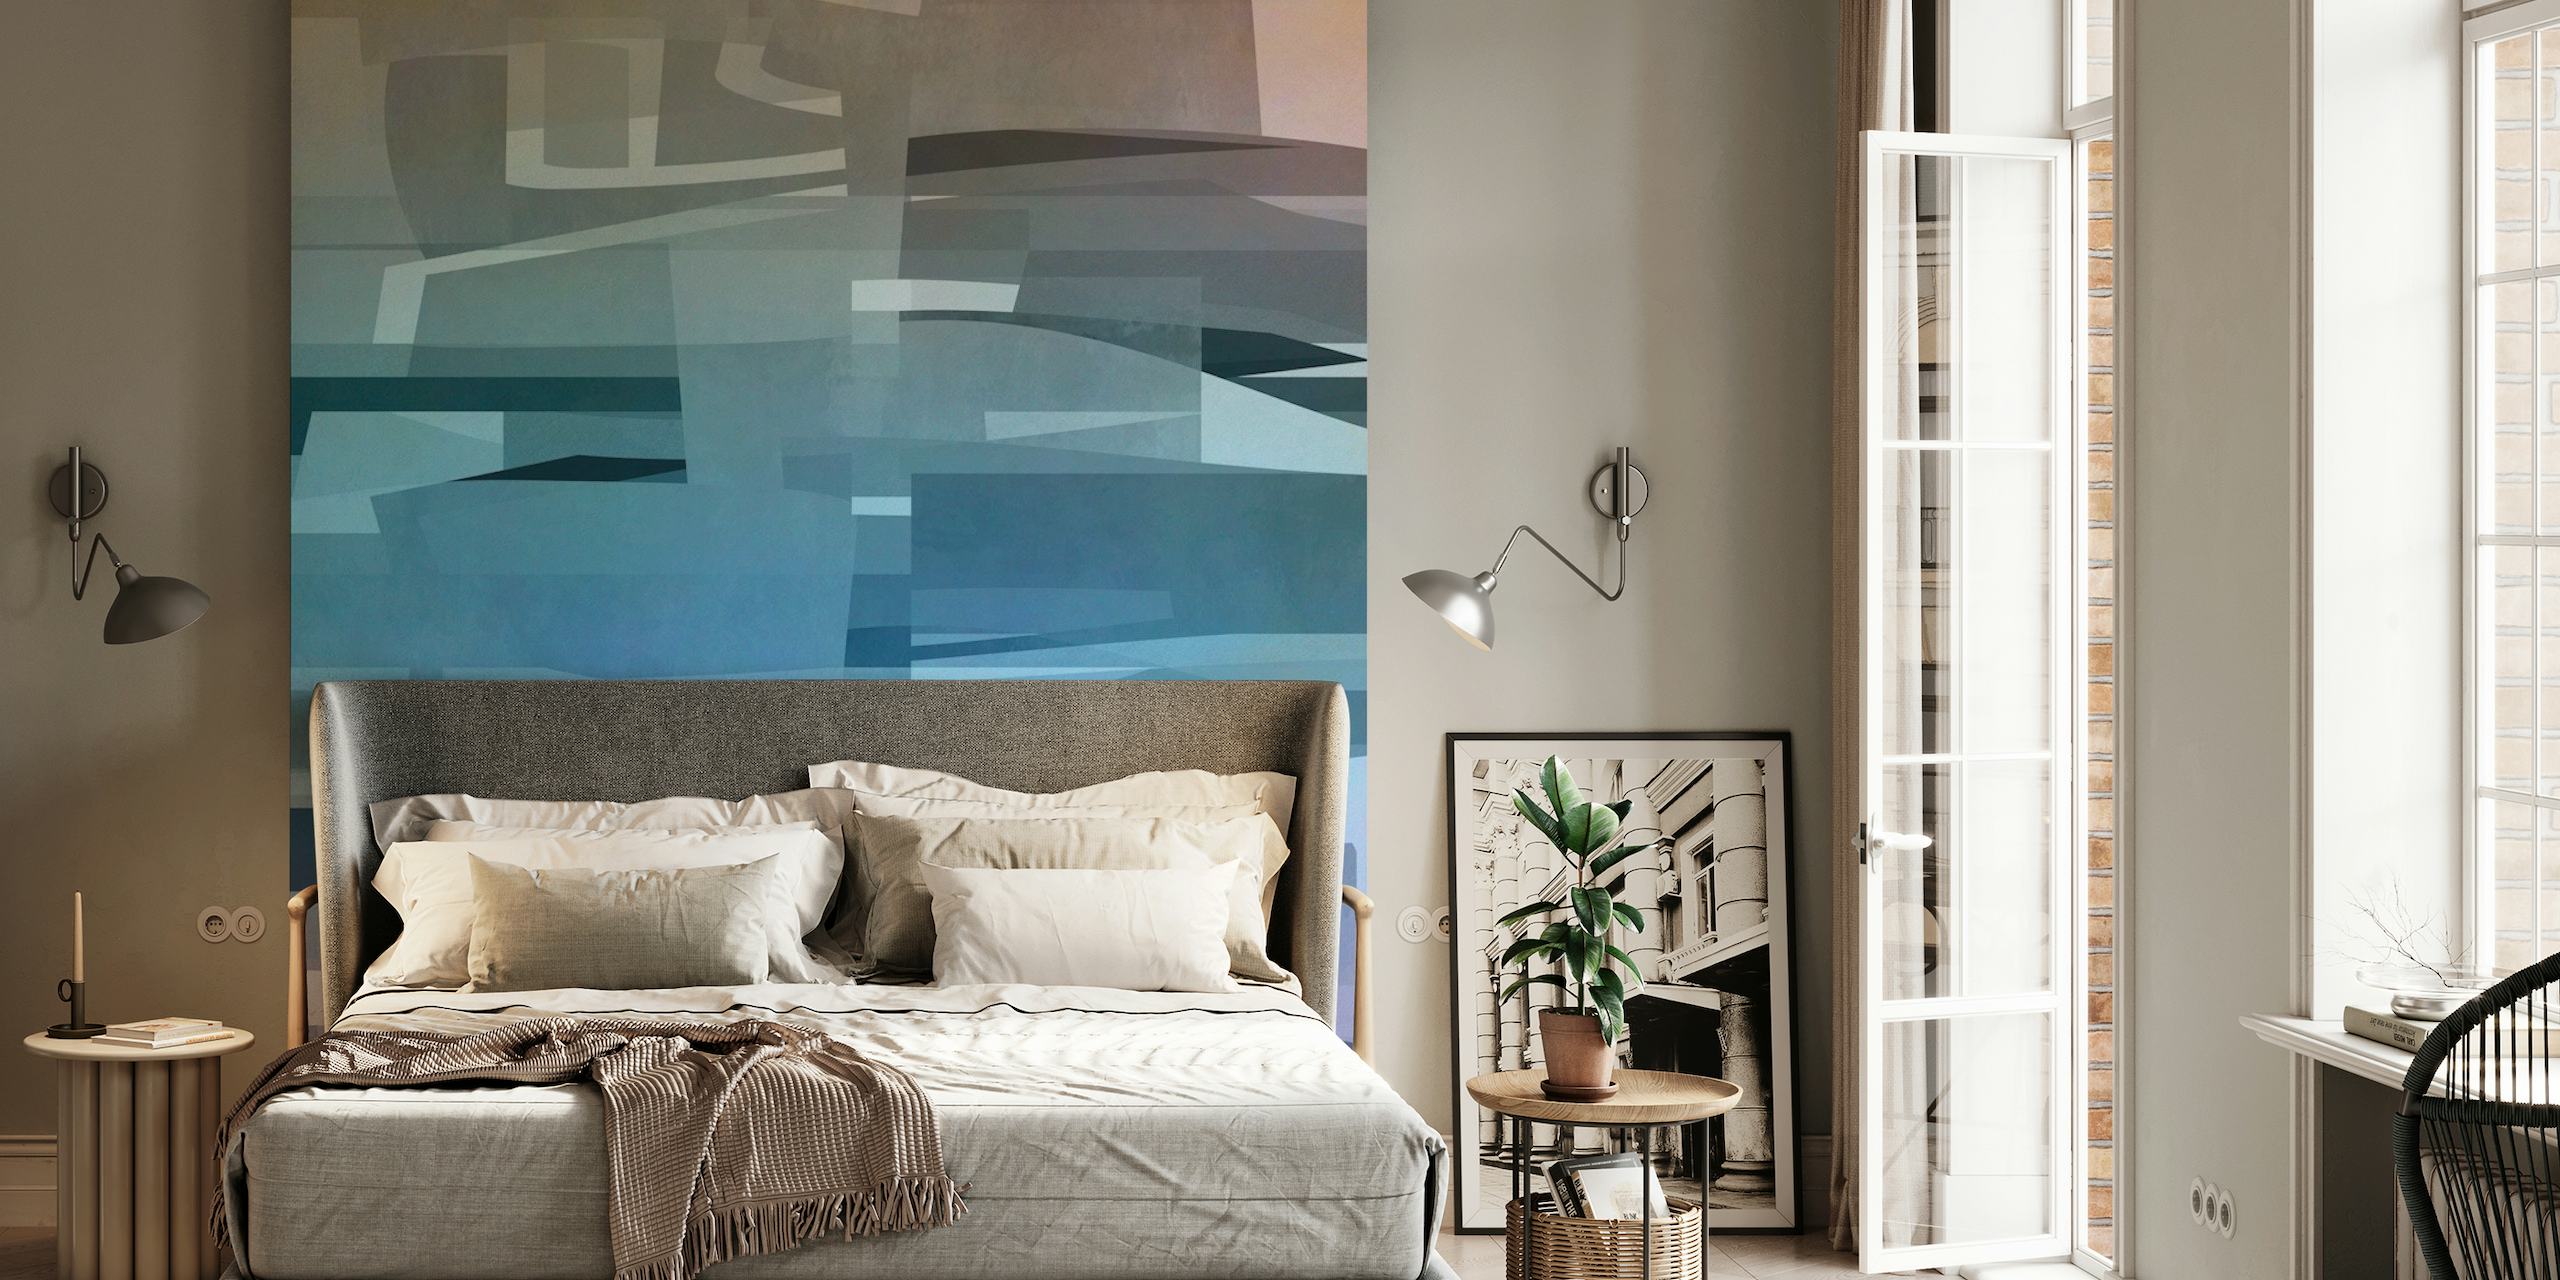 Abstract urban-style wall mural in shades of blue and grey with geometric shapes